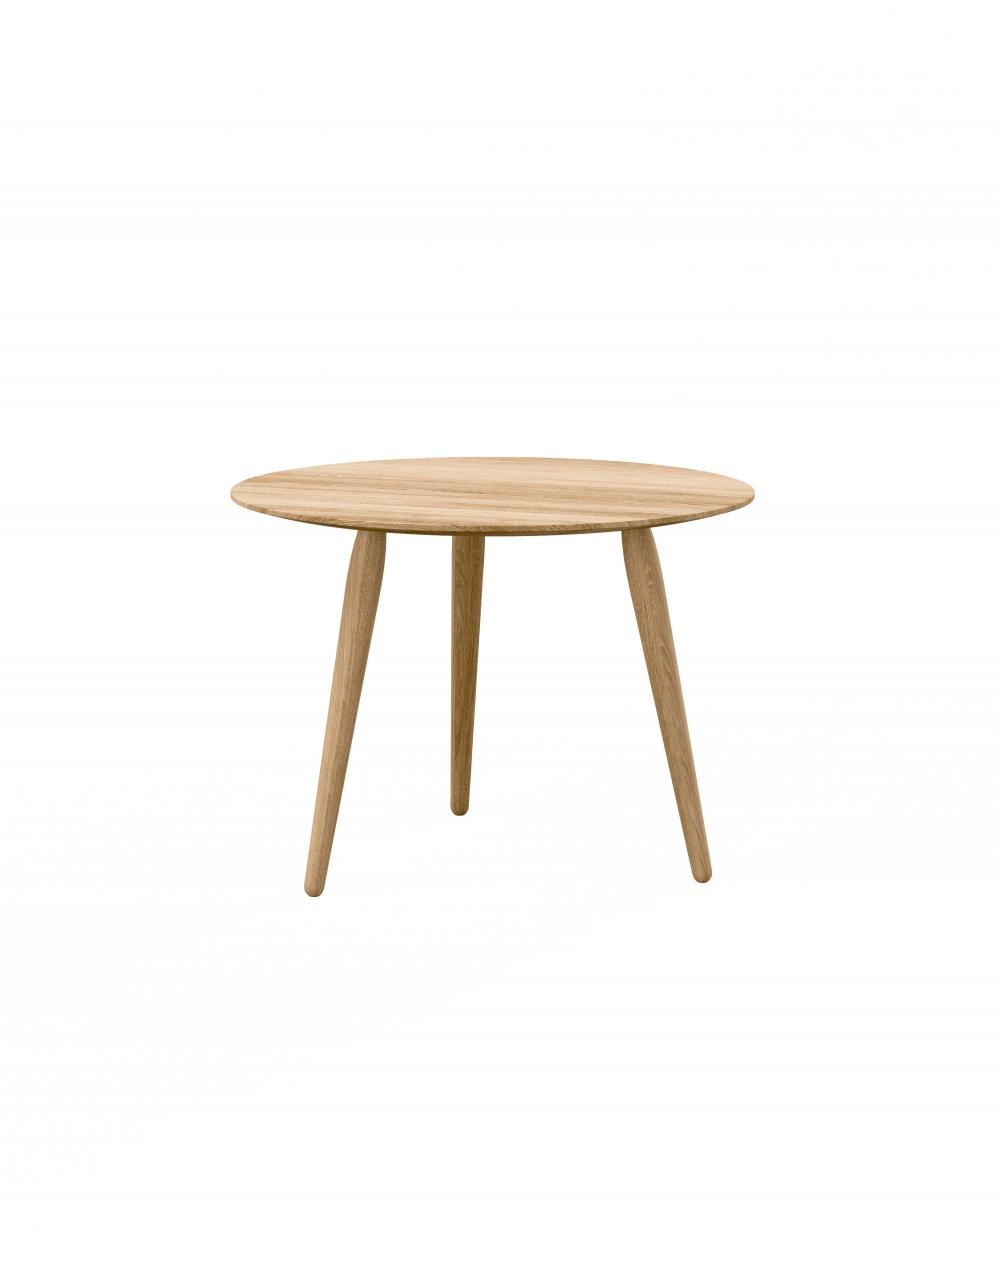 Playround Coffee Table Small Smoked Oak 44cm